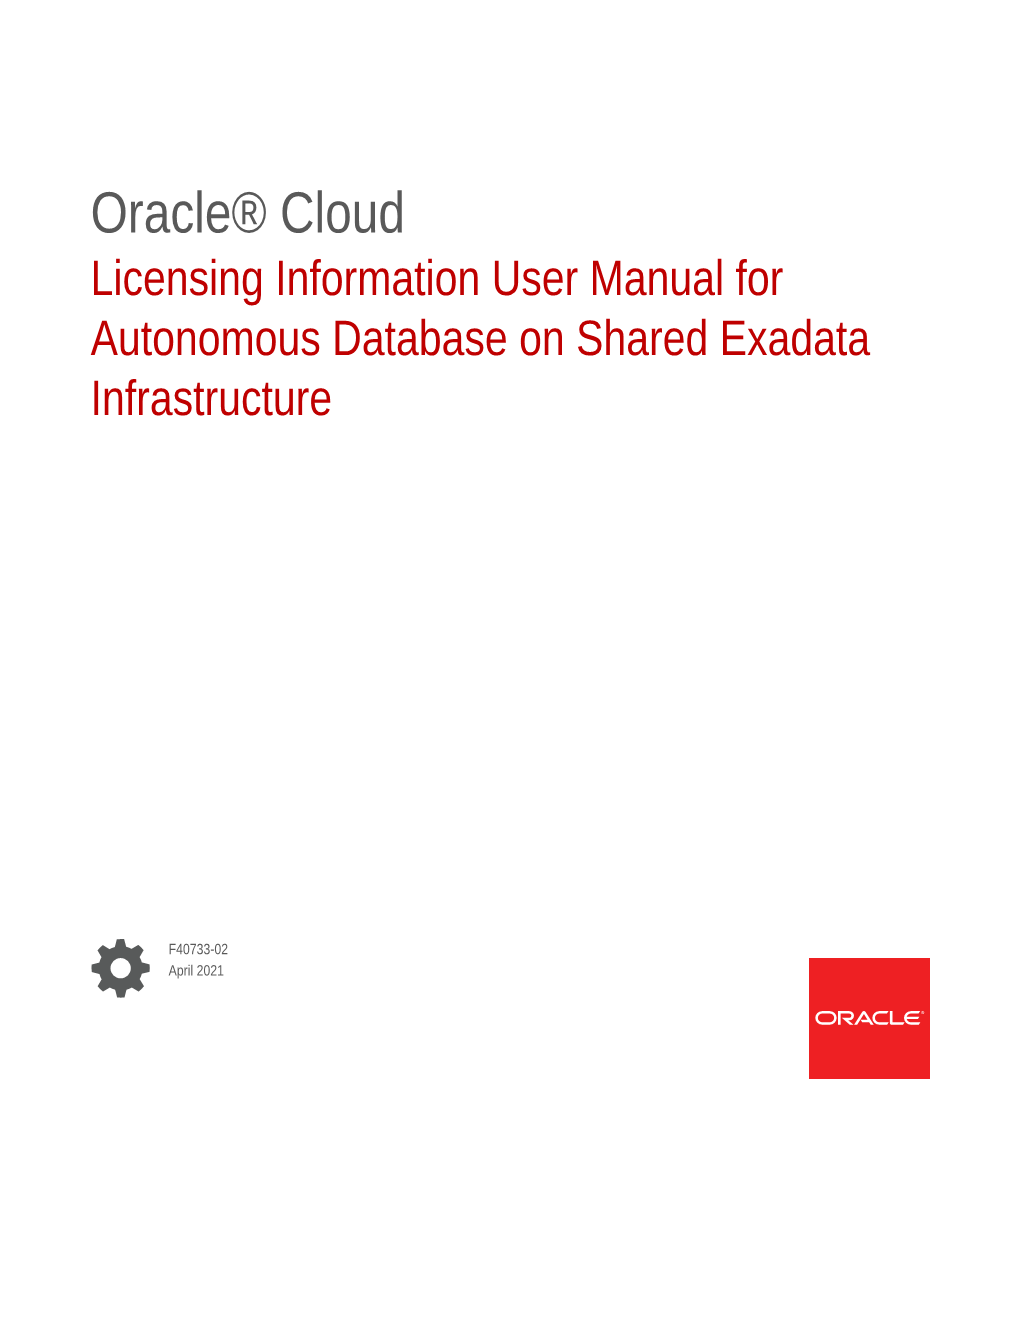 Licensing Information User Manual for Autonomous Database on Shared Exadata Infrastructure